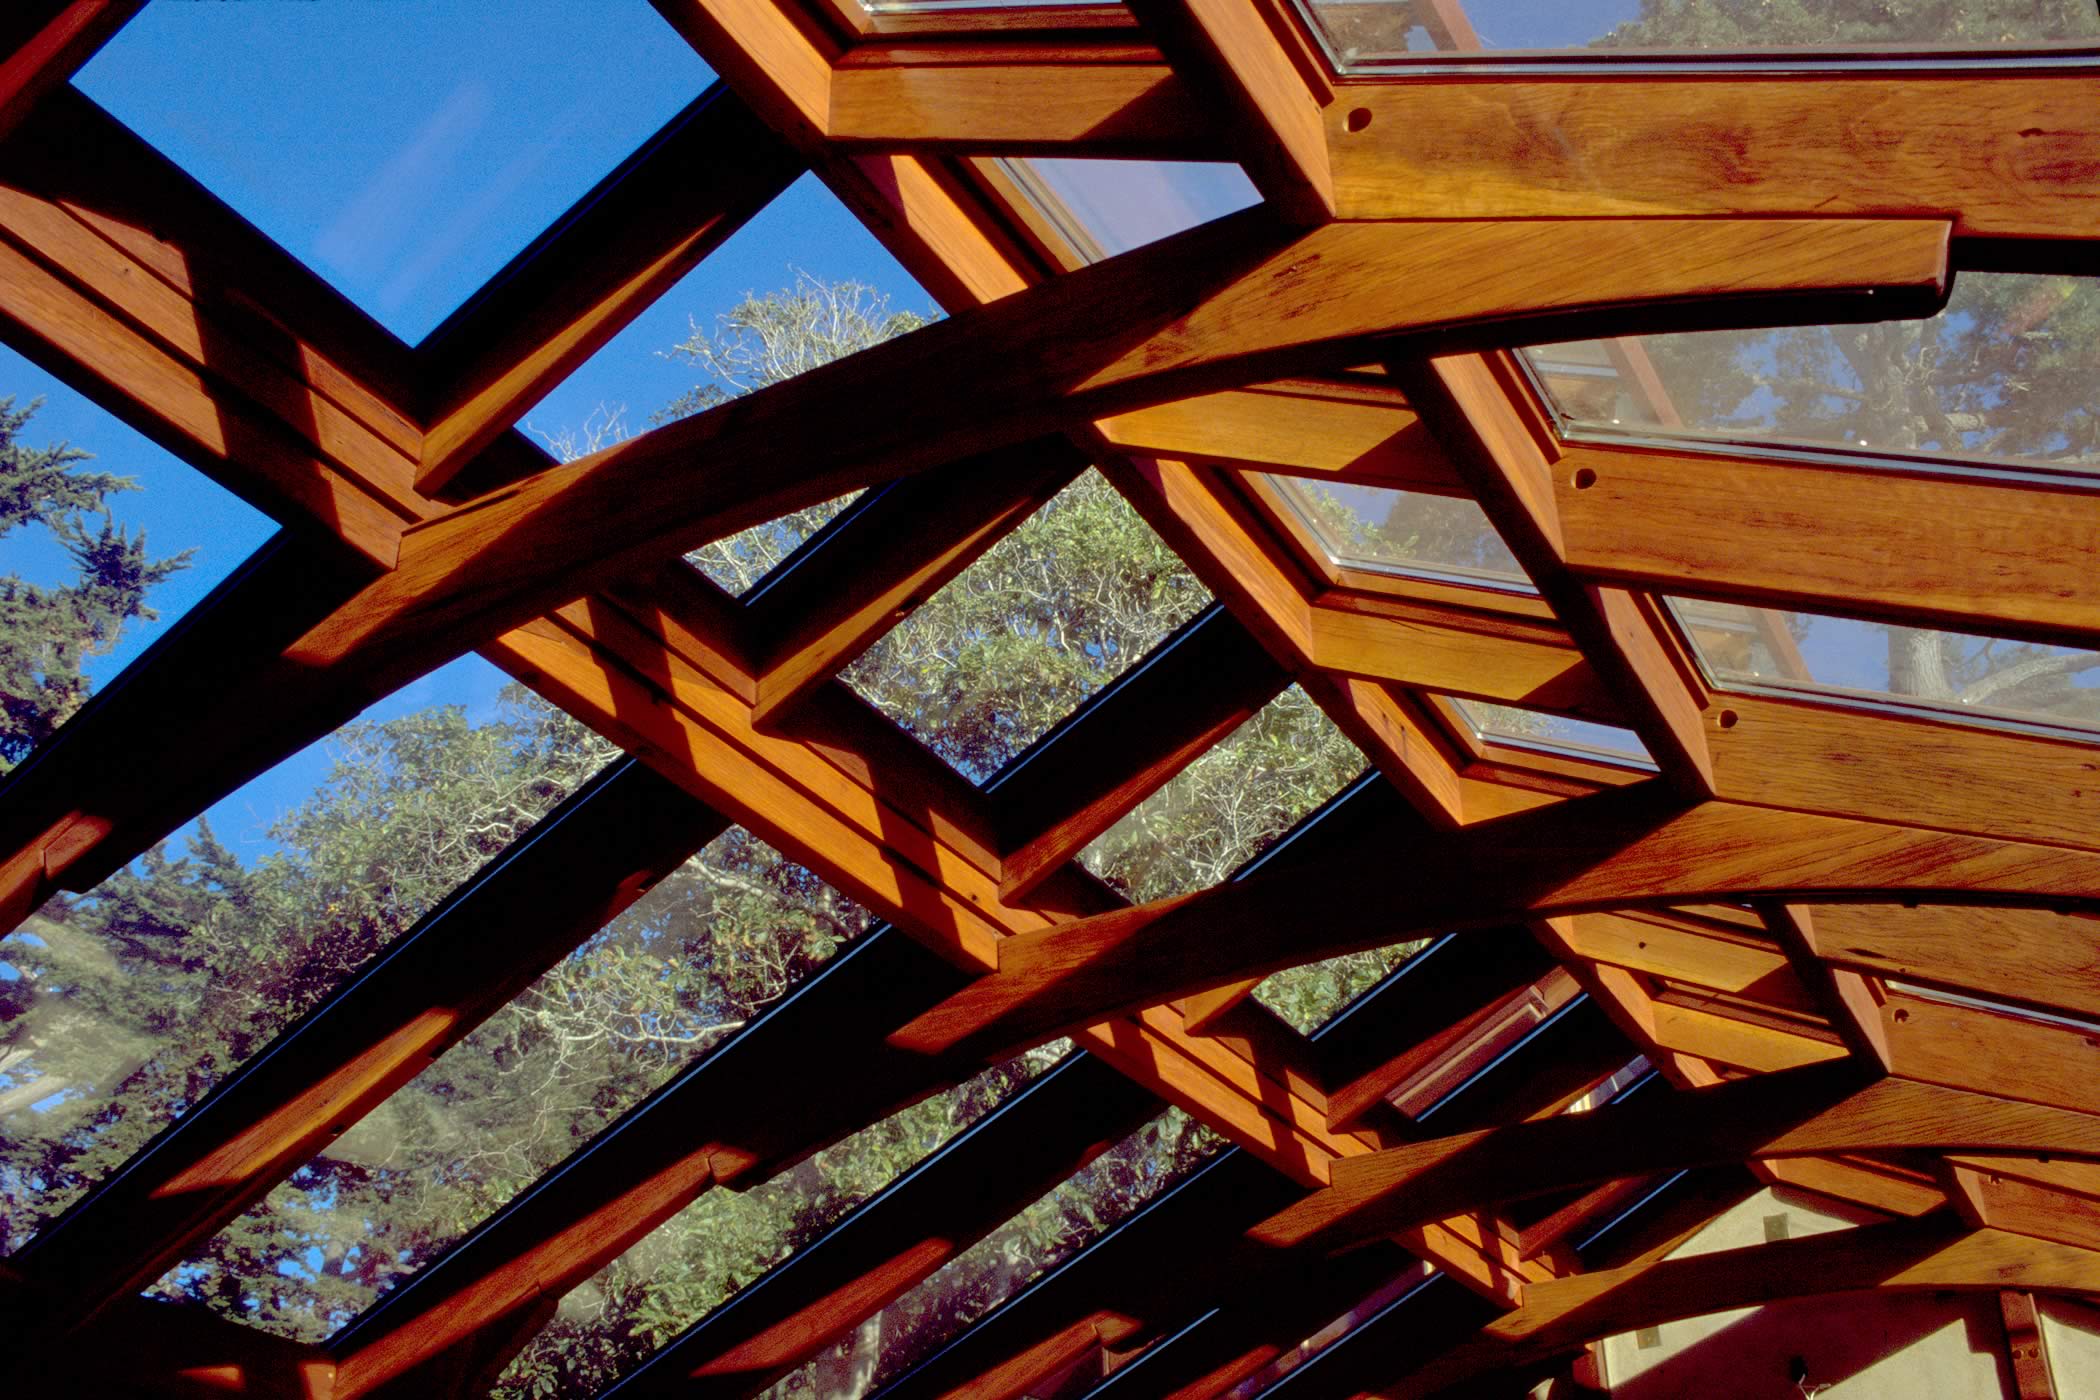 The James house Greenhouse, Carmel Highlands, California: The greenhouse detail shows opening glazed ridge vents for natural ventilation and recycled eucalyptus hardwood timber trusses (photographed during construction). Photo by James Morrison.